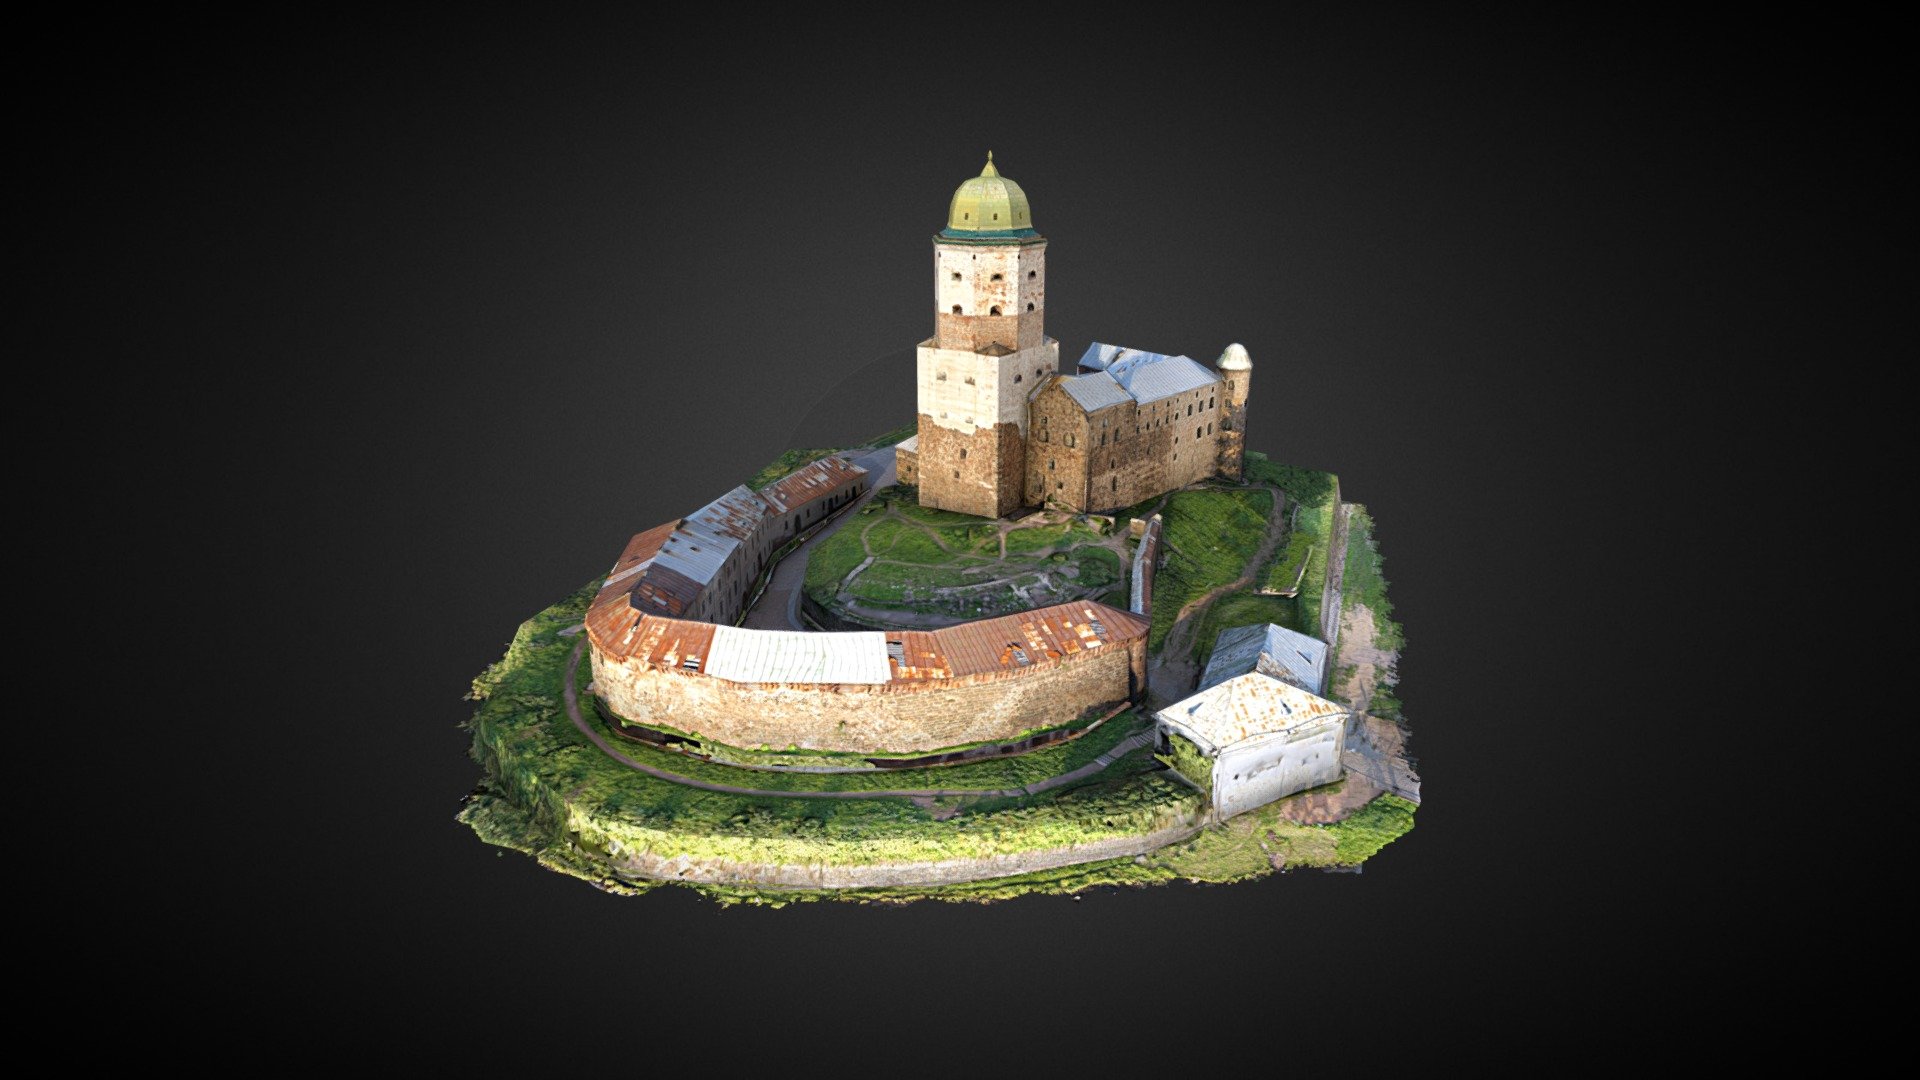 Created from 3D scan.
3D scan by Andrey Butorin - Vyborg Castle - 3D model by Crowcage 3d model